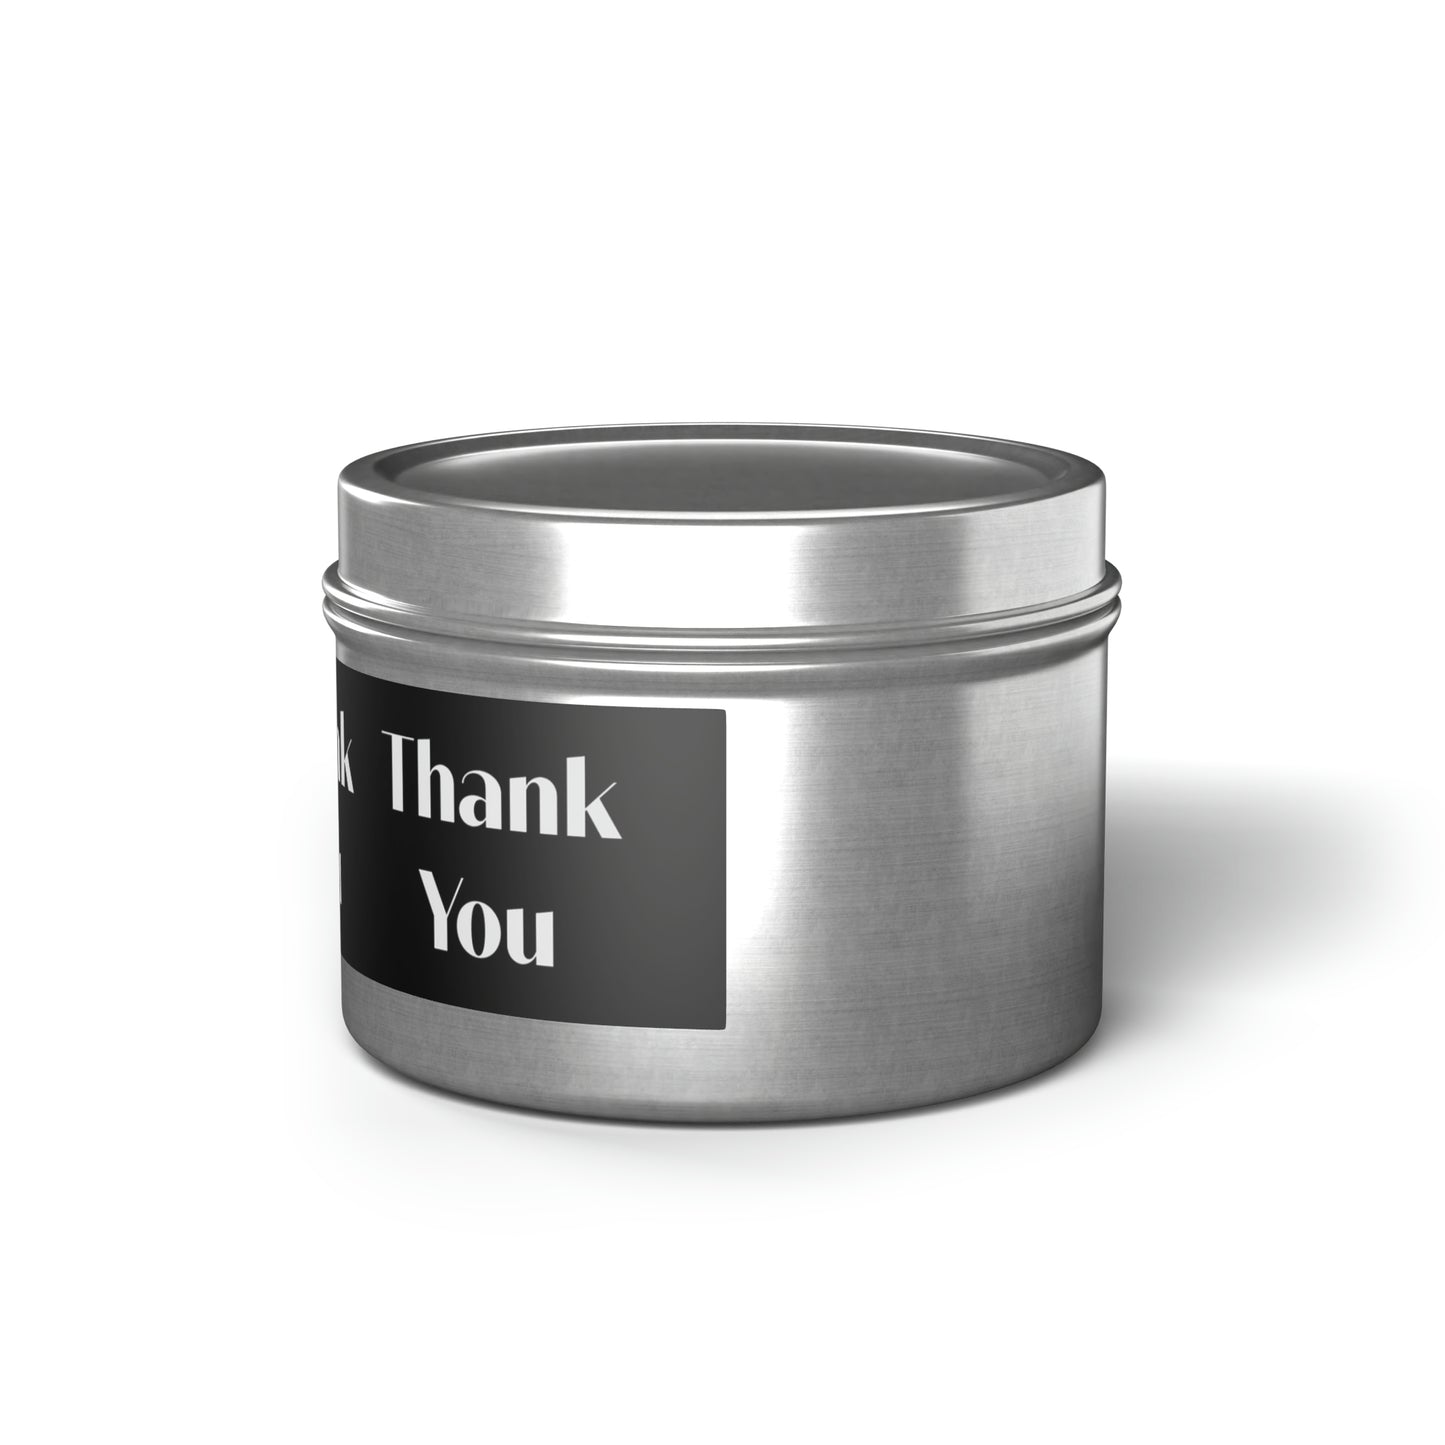 Thank-you Tin Candles: 4 oz; 5 scents; Textual message